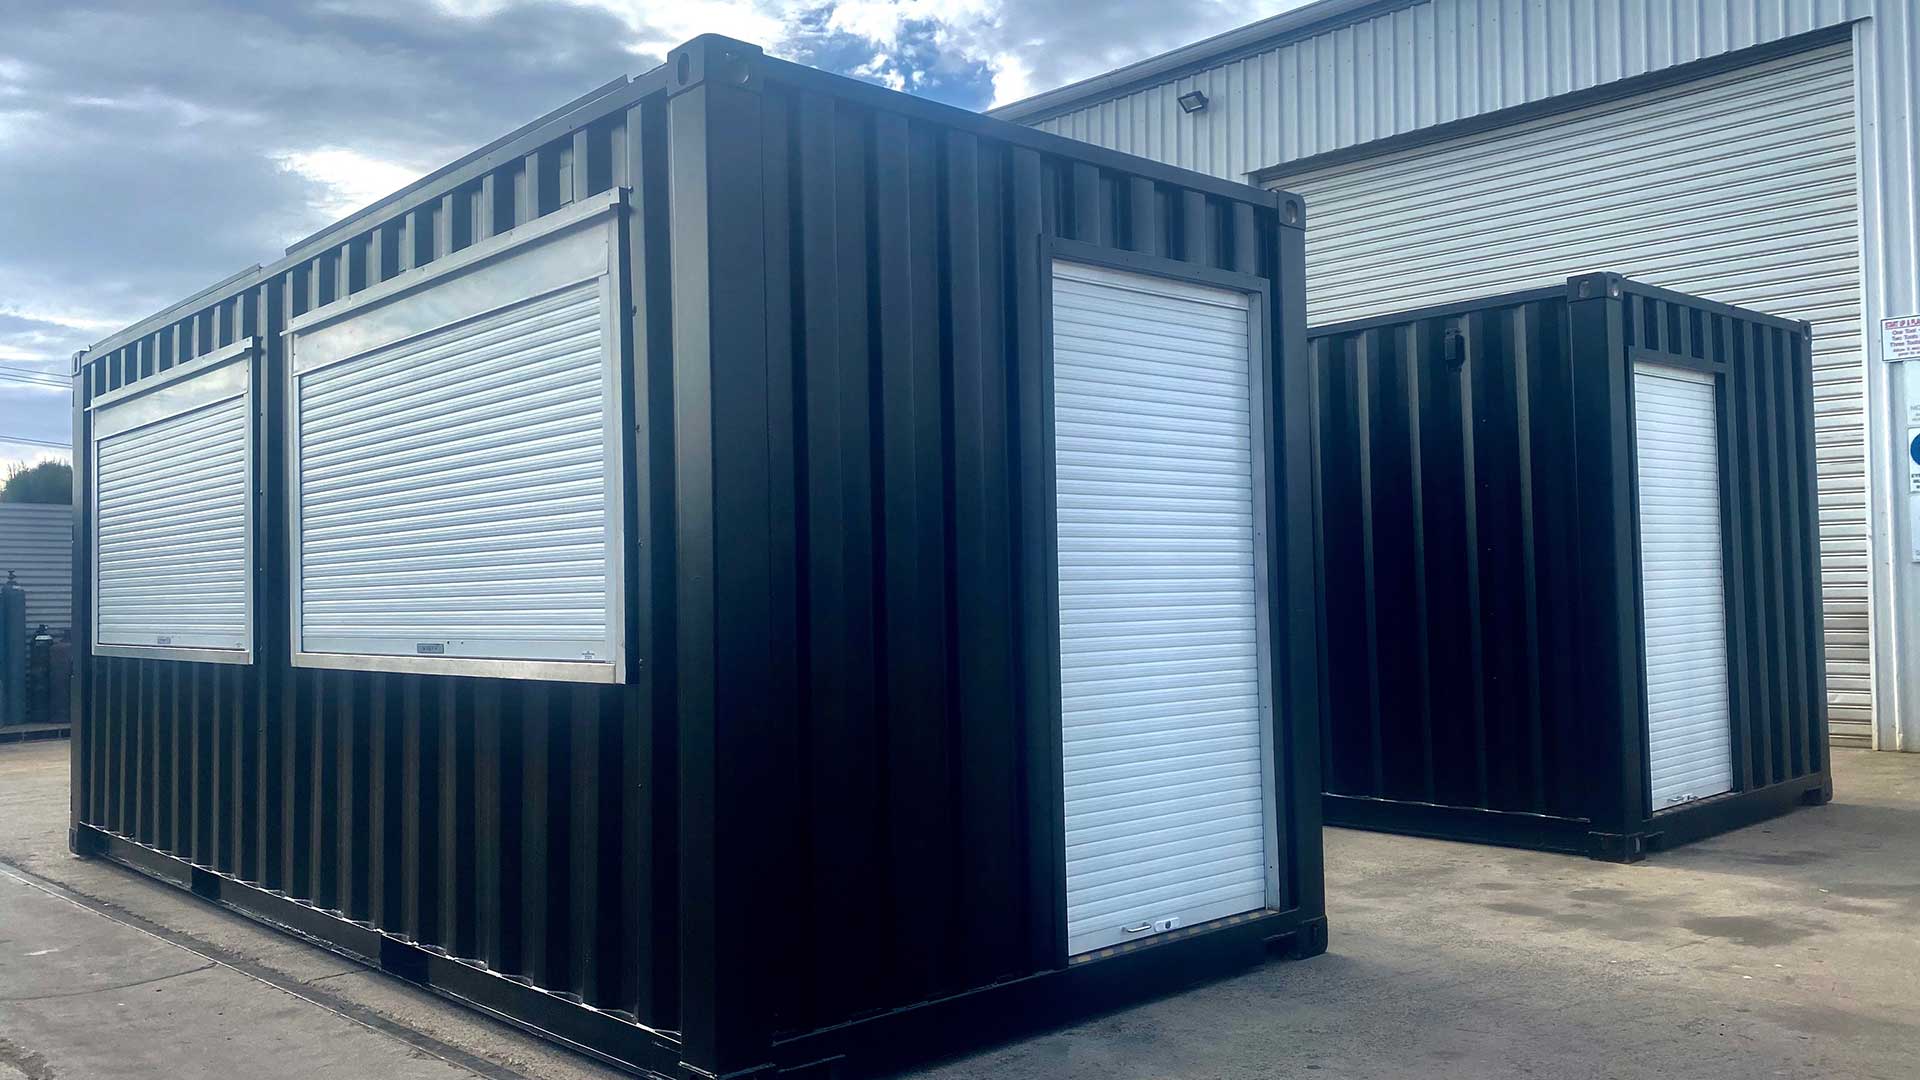 Cleanskin Shipping container